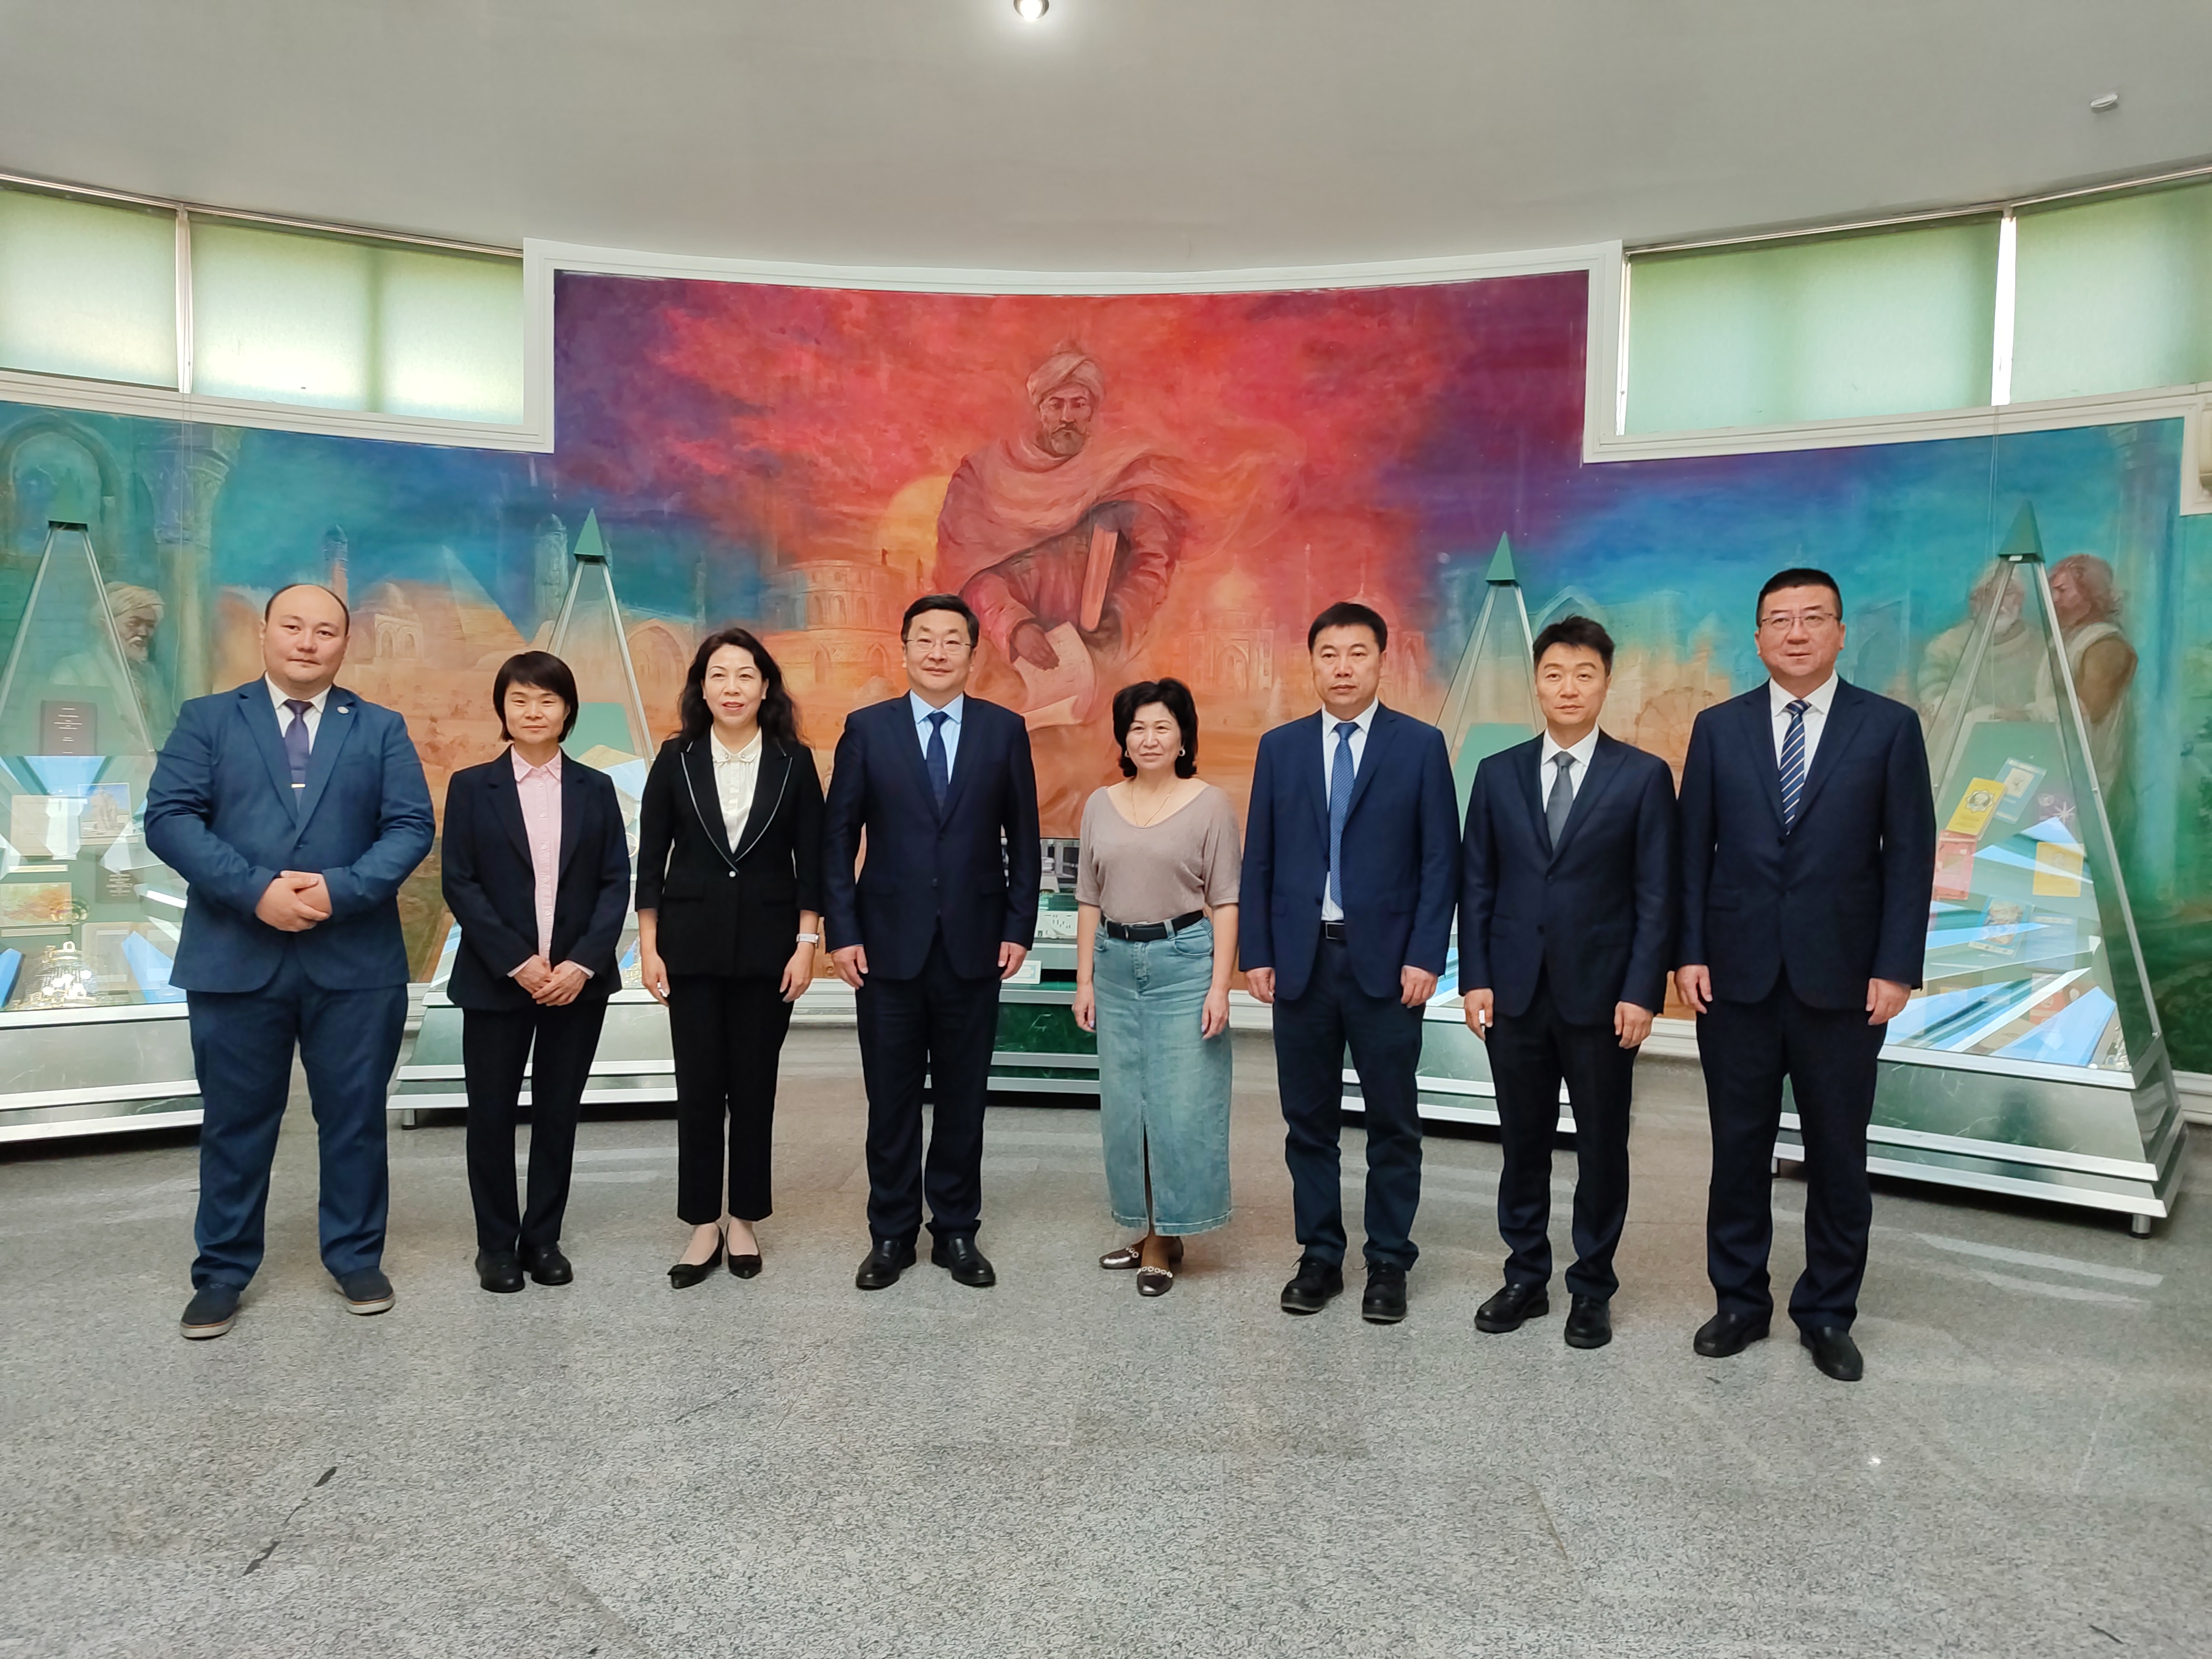 In Al-Farabi KazNU a meeting of the university administration with representatives of the corporation “Xinjian Sanbao” headed by Deputy Party Yang Yining, who visited the leading university of the country with a working visit, took place